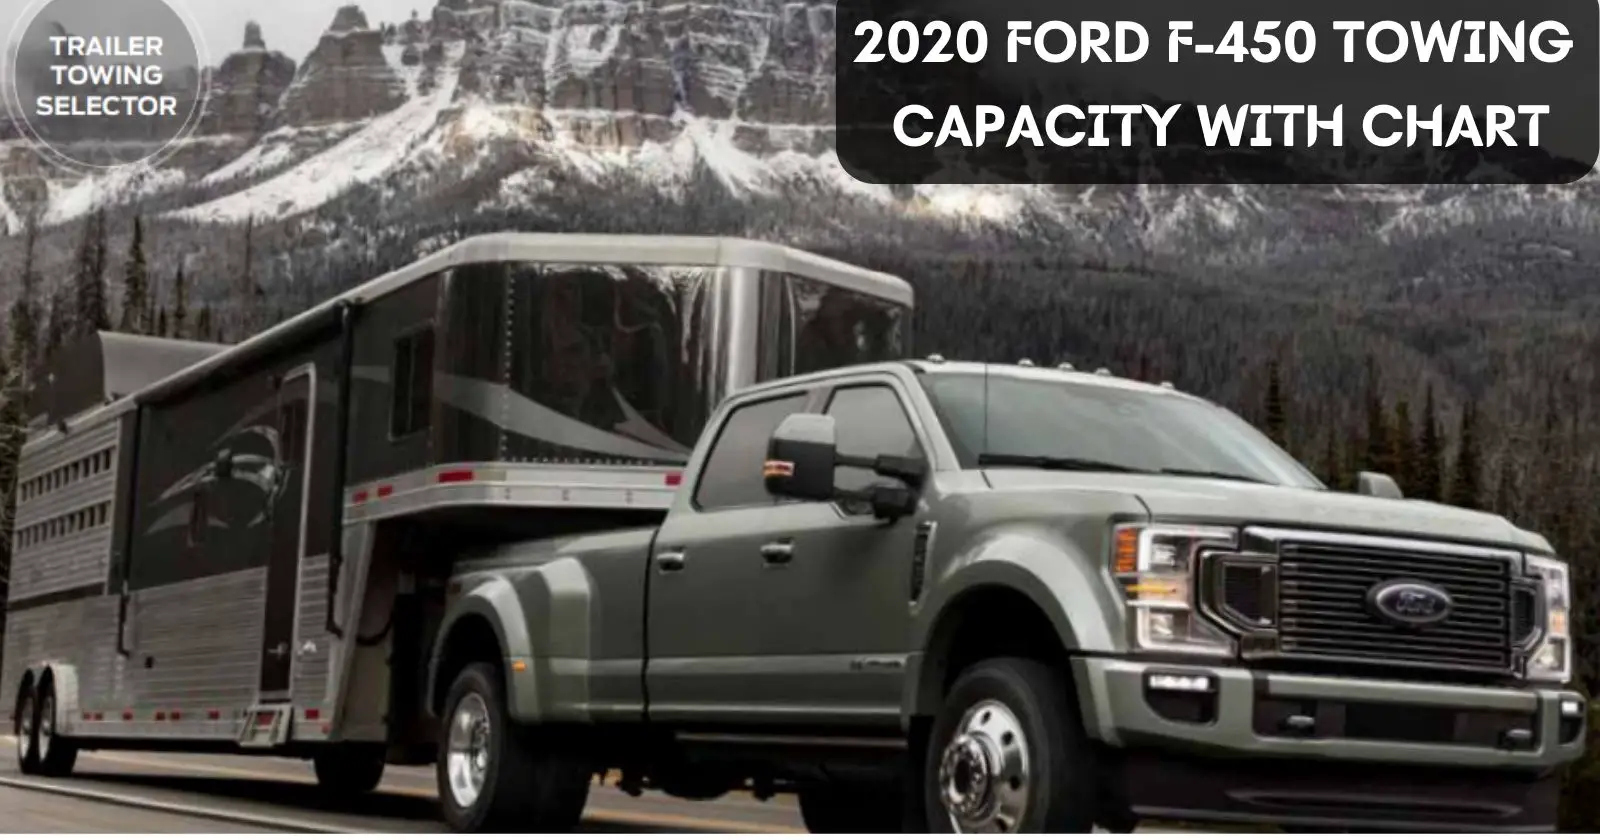 2020-ford-f-450-towing-capacity-with-chart-thecartowing